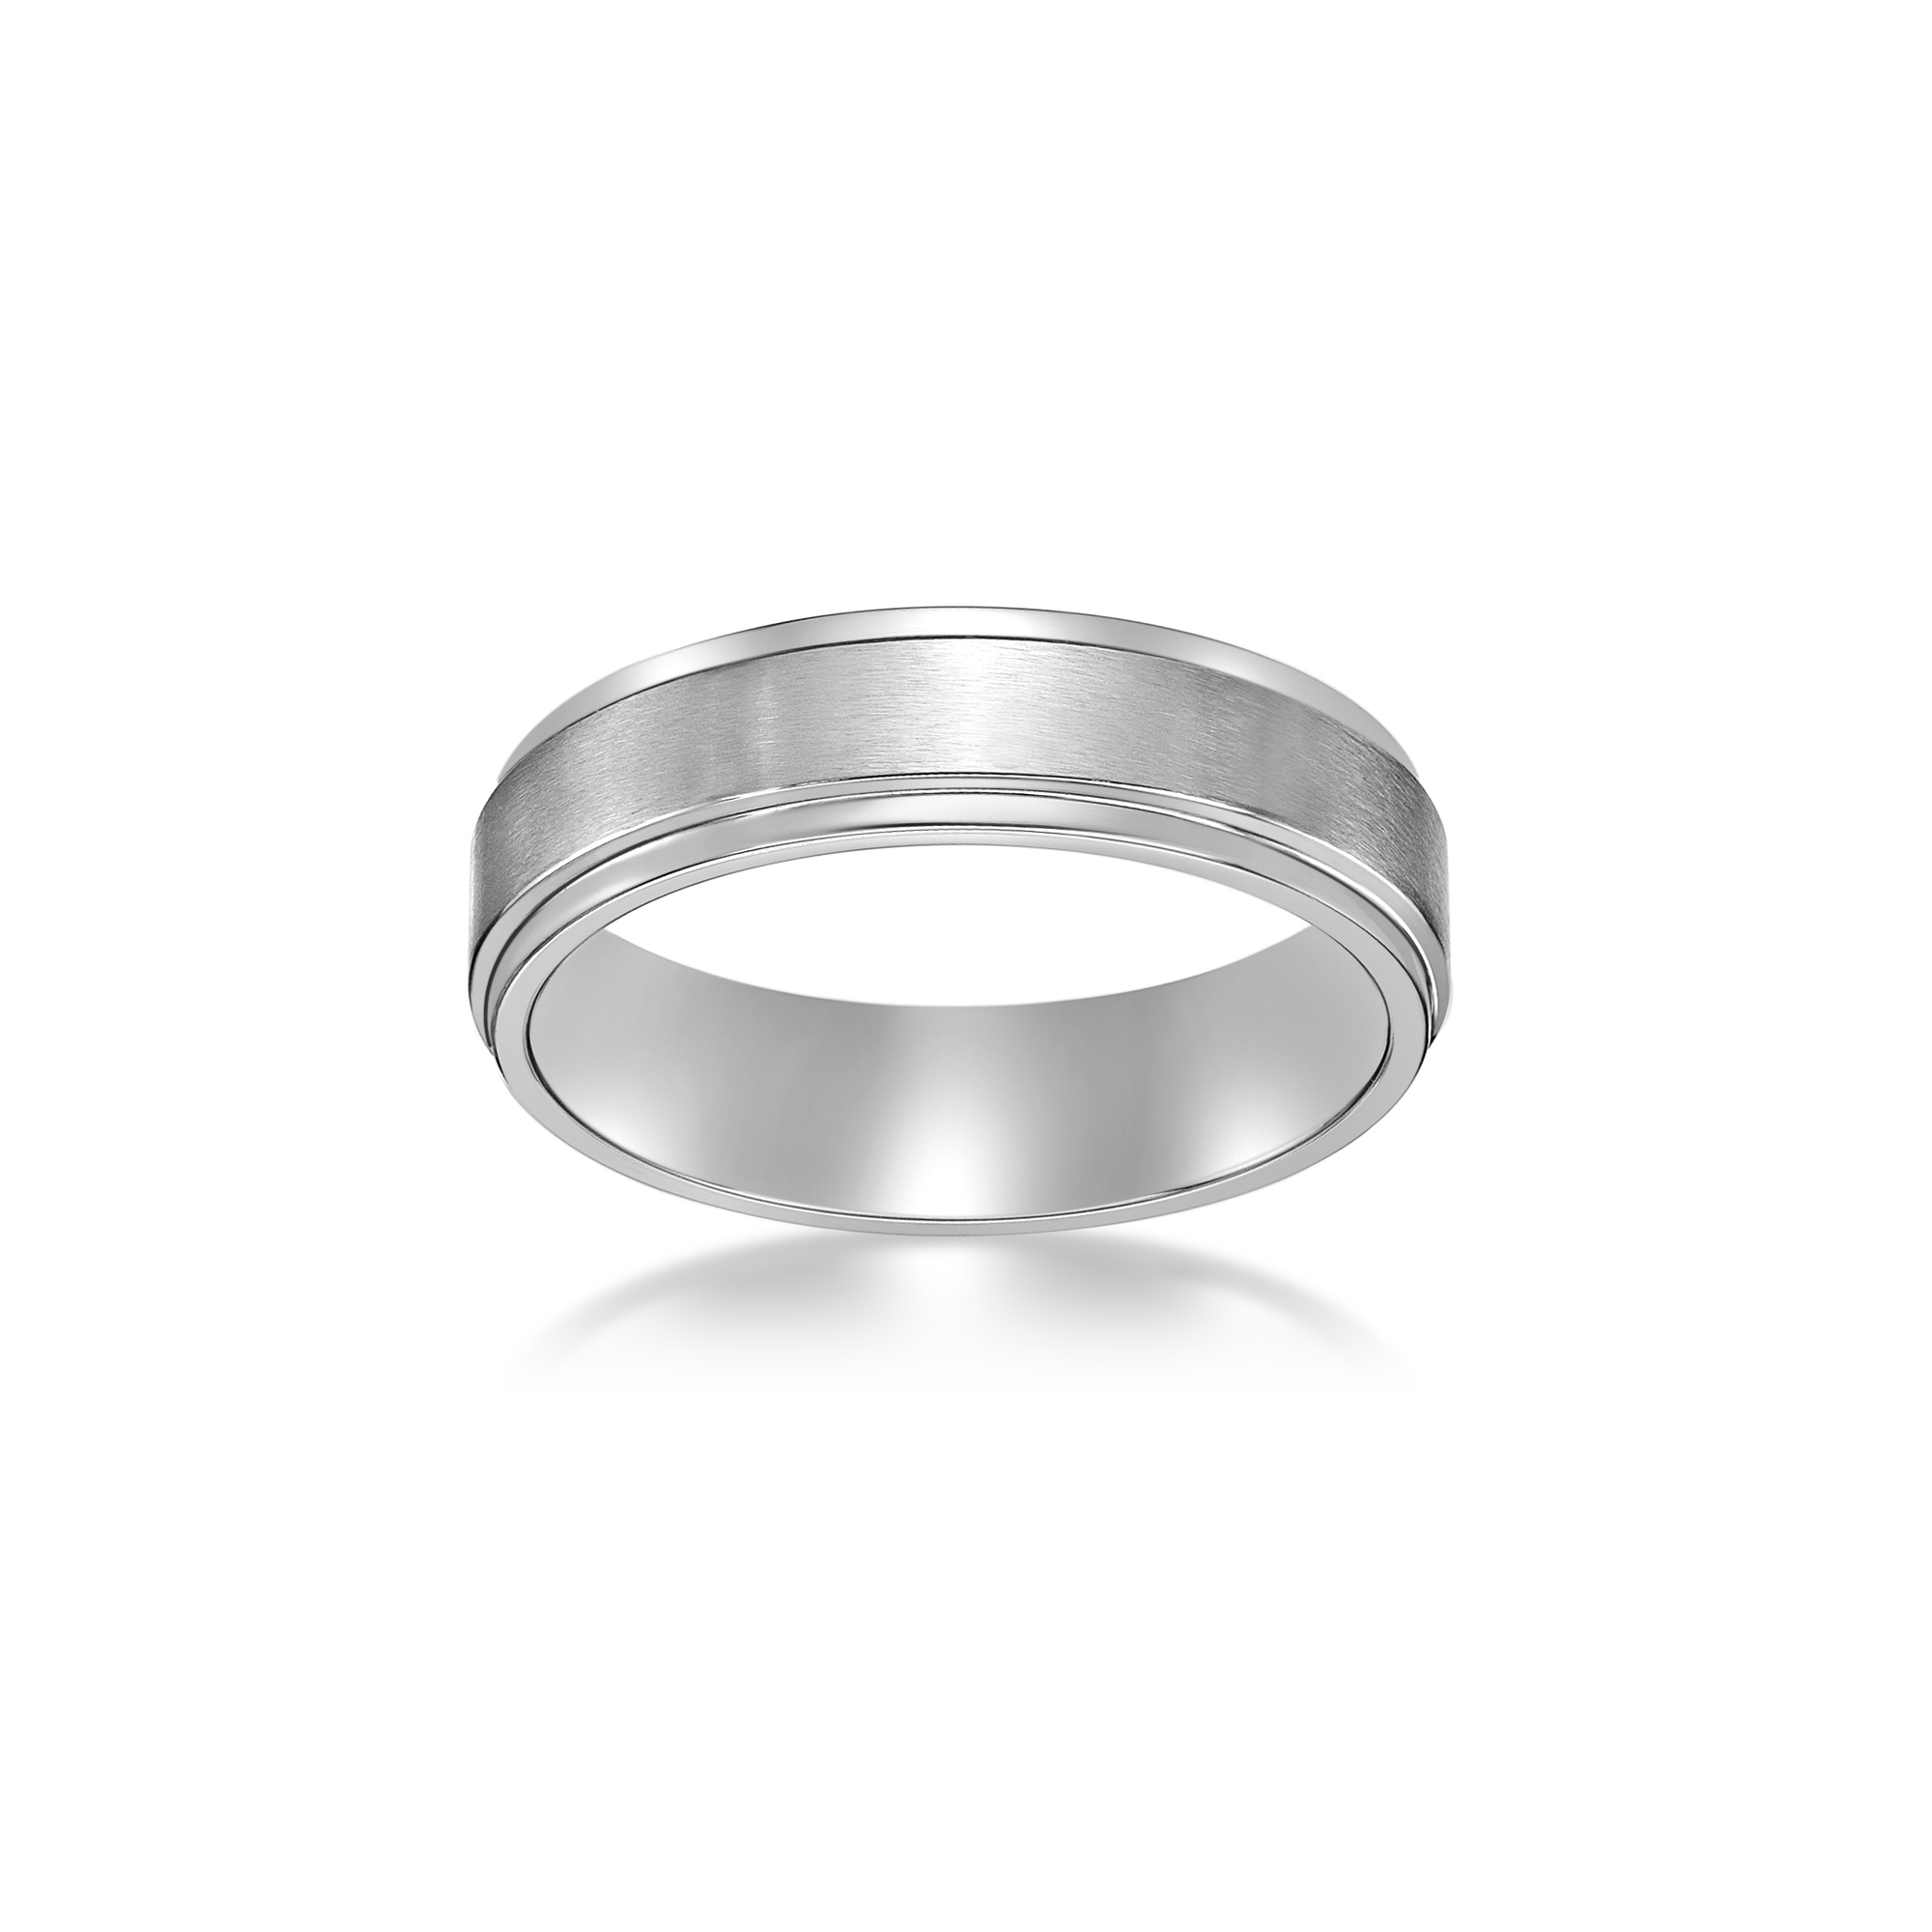 51701-ring-default-collection-stainless-steel-.jpg